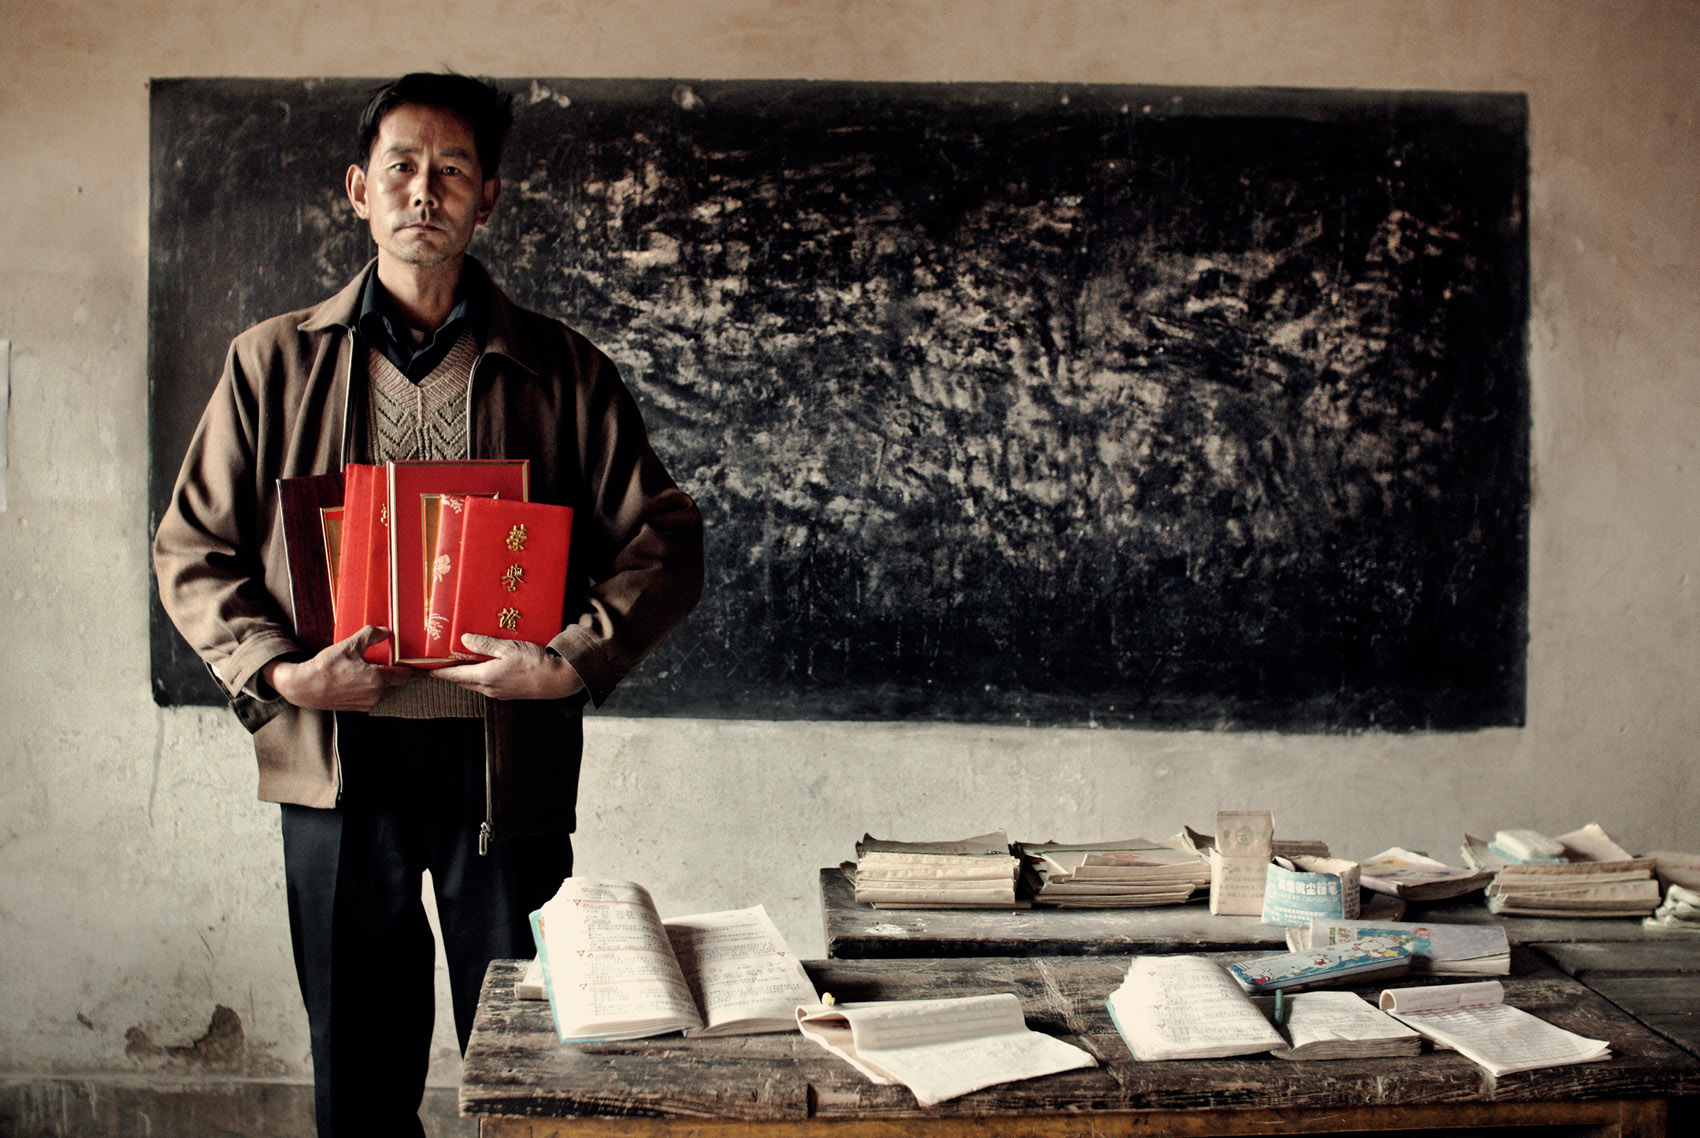   Lei Shui Xiang, headmaster of Guan Shan (Gansu) primary school, holding awards. Devoted to the children, covered with academic honors, his monthly income of RMB 150 hasn’t changed in 25 years, in spite of repeated request to have his status changed